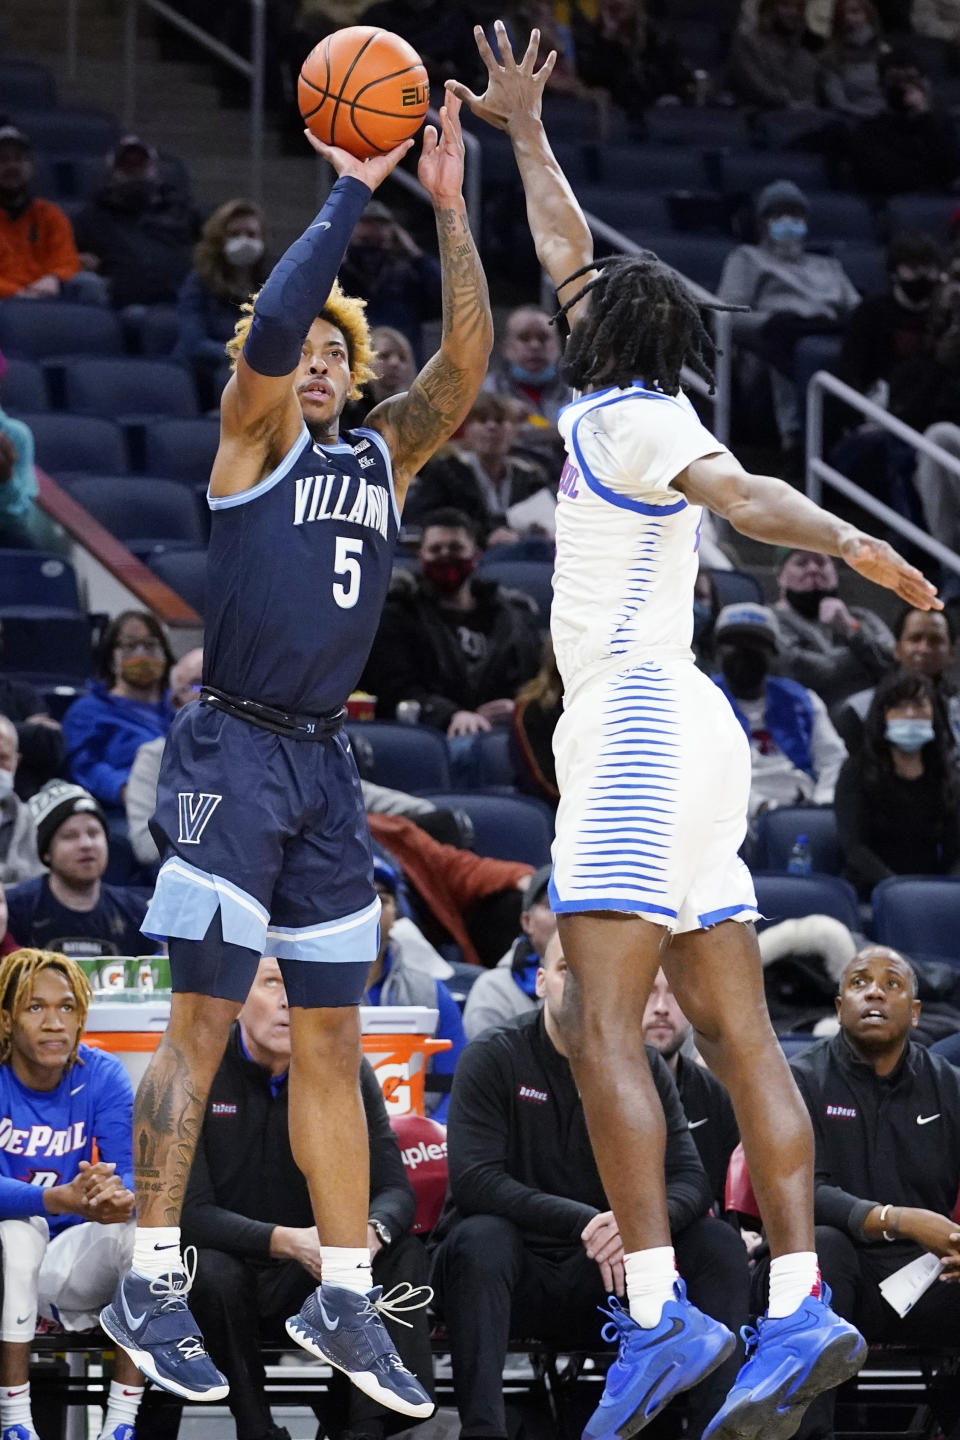 Villanova guard Justin Moore, left, shoots against DePaul guard Javon Freeman-Liberty during the first half of an NCAA college basketball game in Chicago, Saturday, Jan. 8, 2022. (AP Photo/Nam Y. Huh)